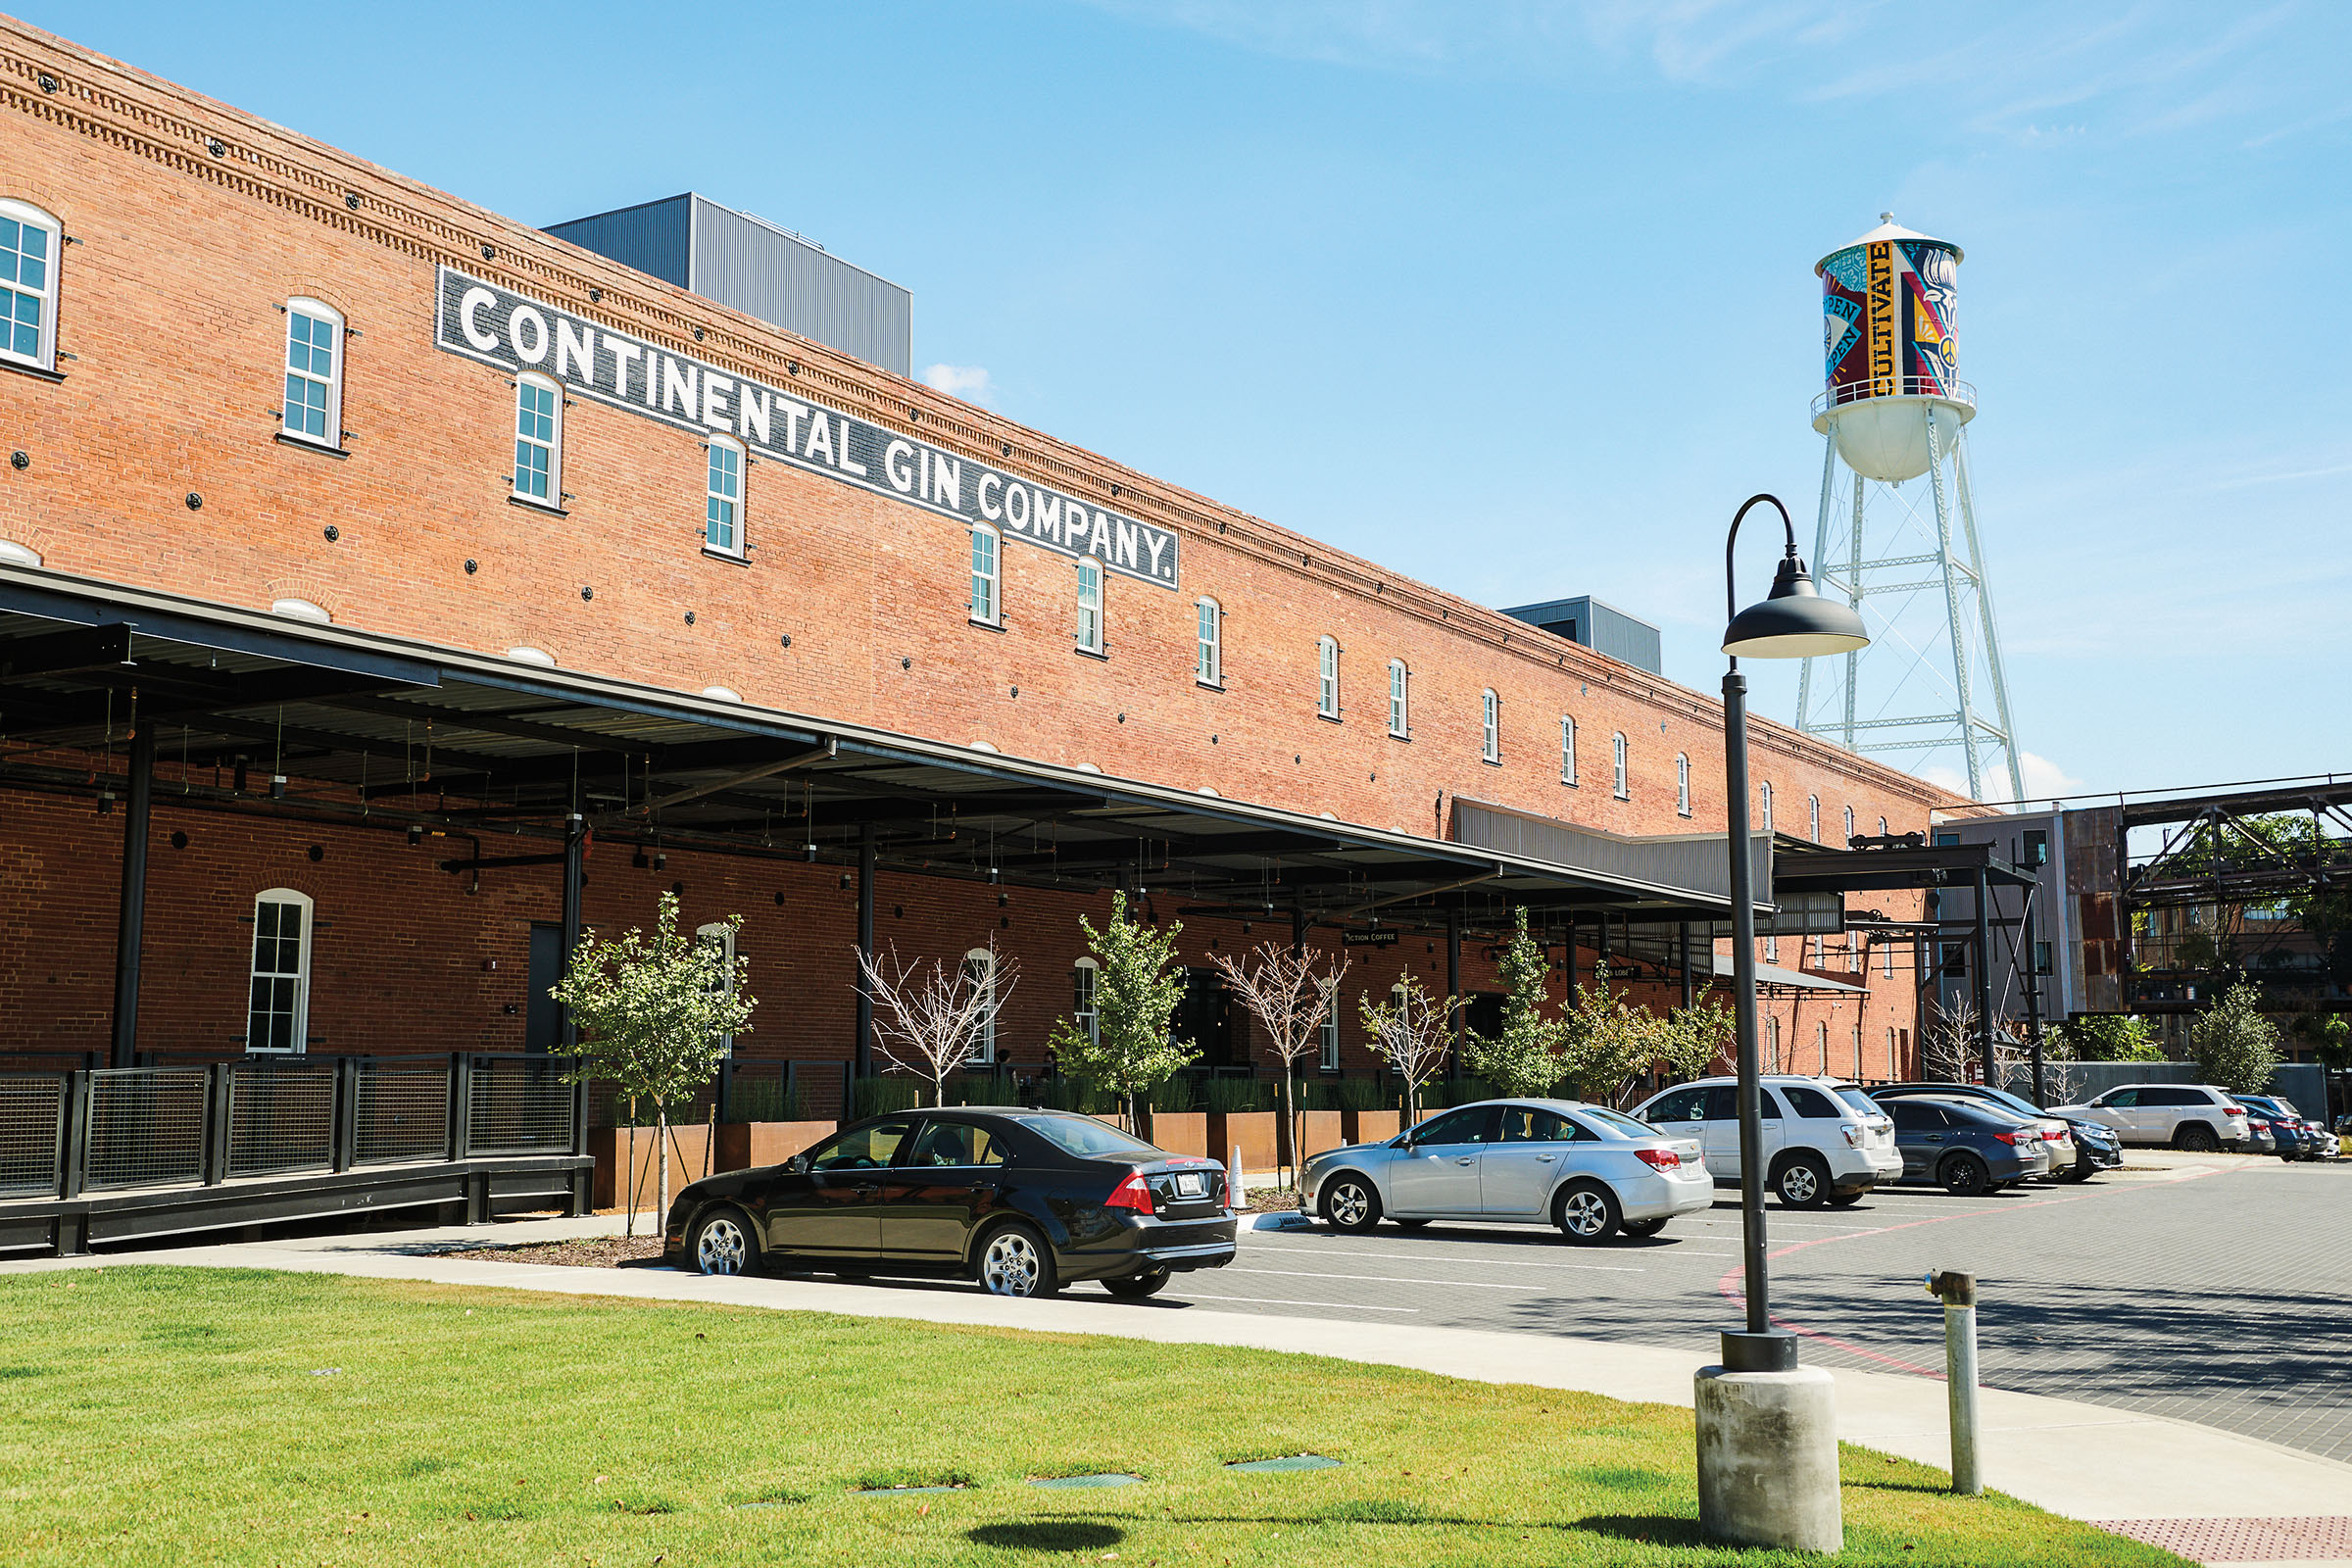 The outside of a brick building with a large sign reading "Continental Gin Company"